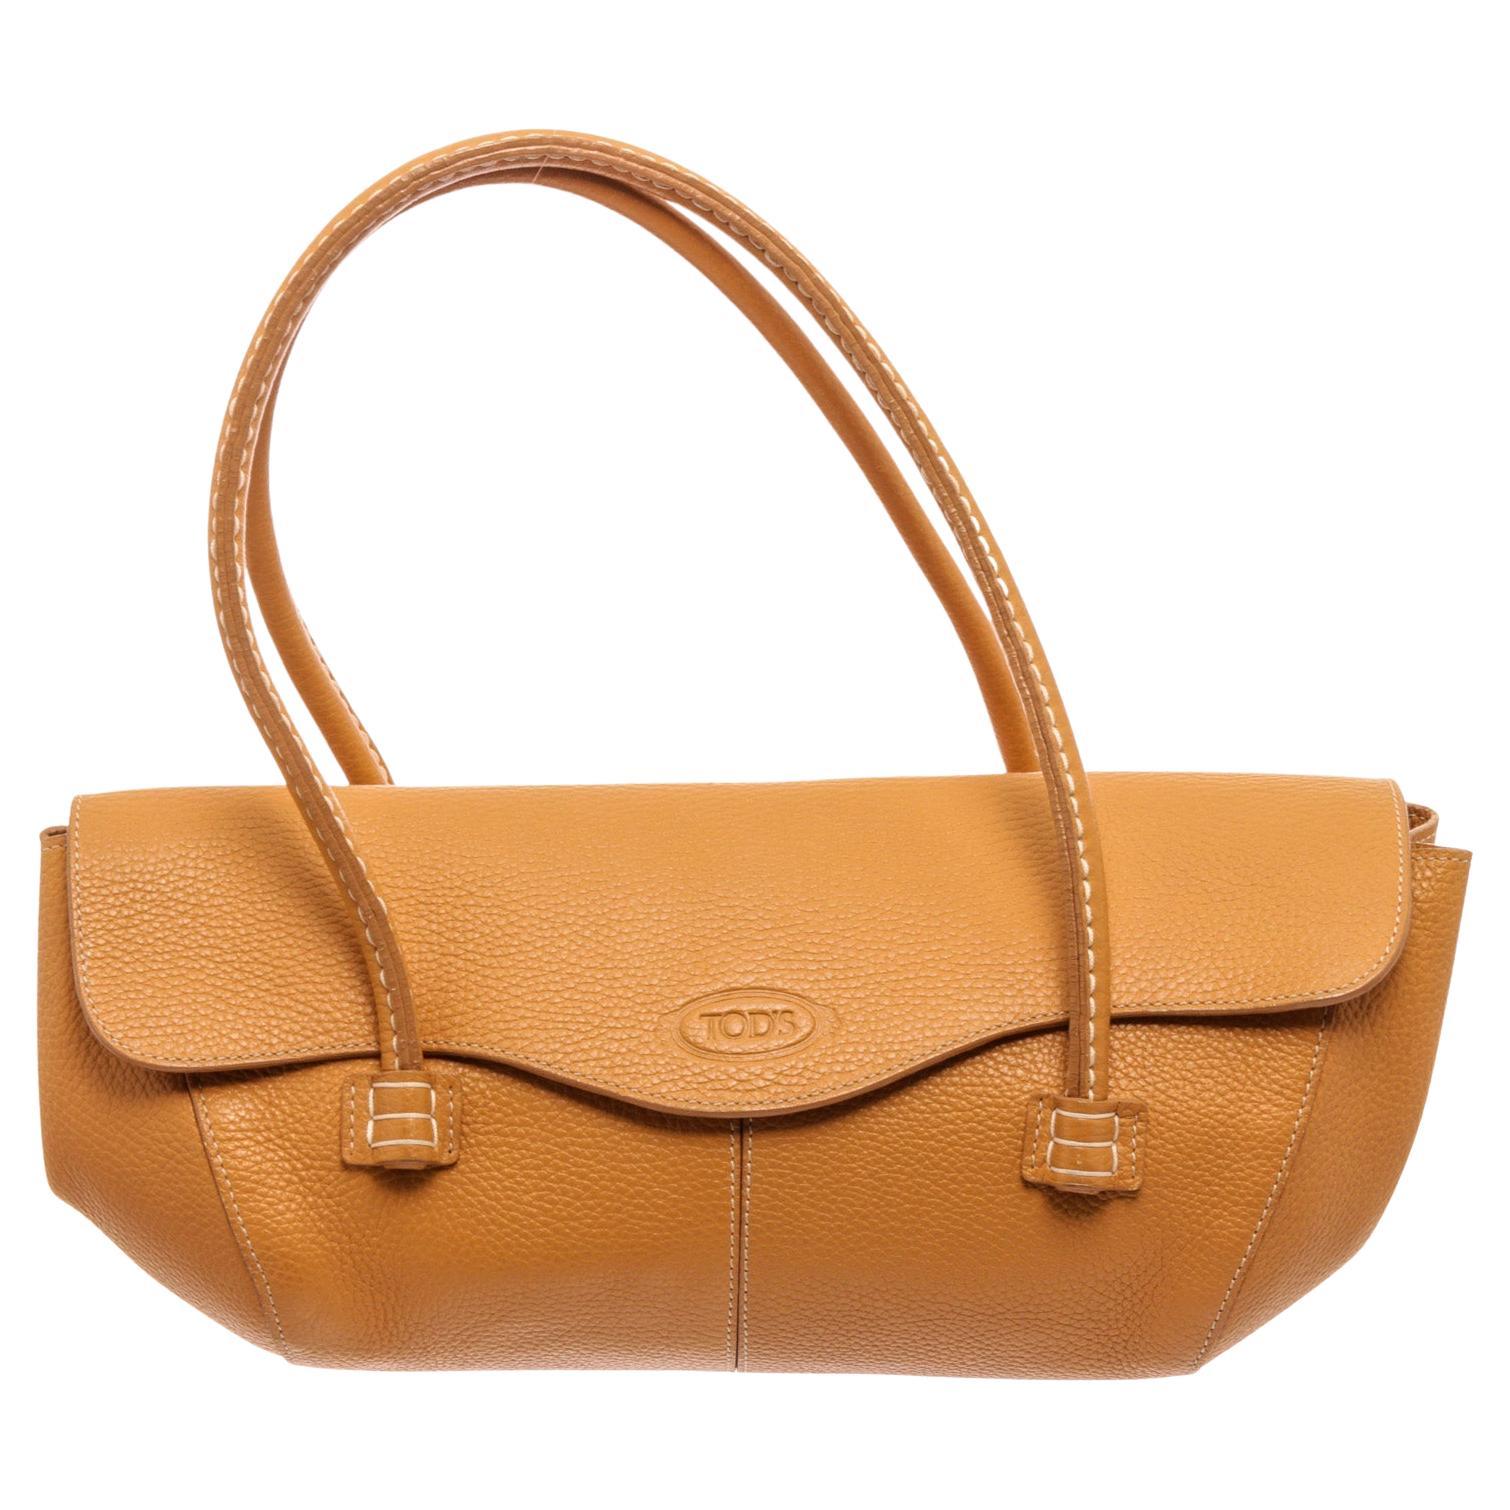 Tods Orange Small Leather Shoulder Bag with gold-tone hardware